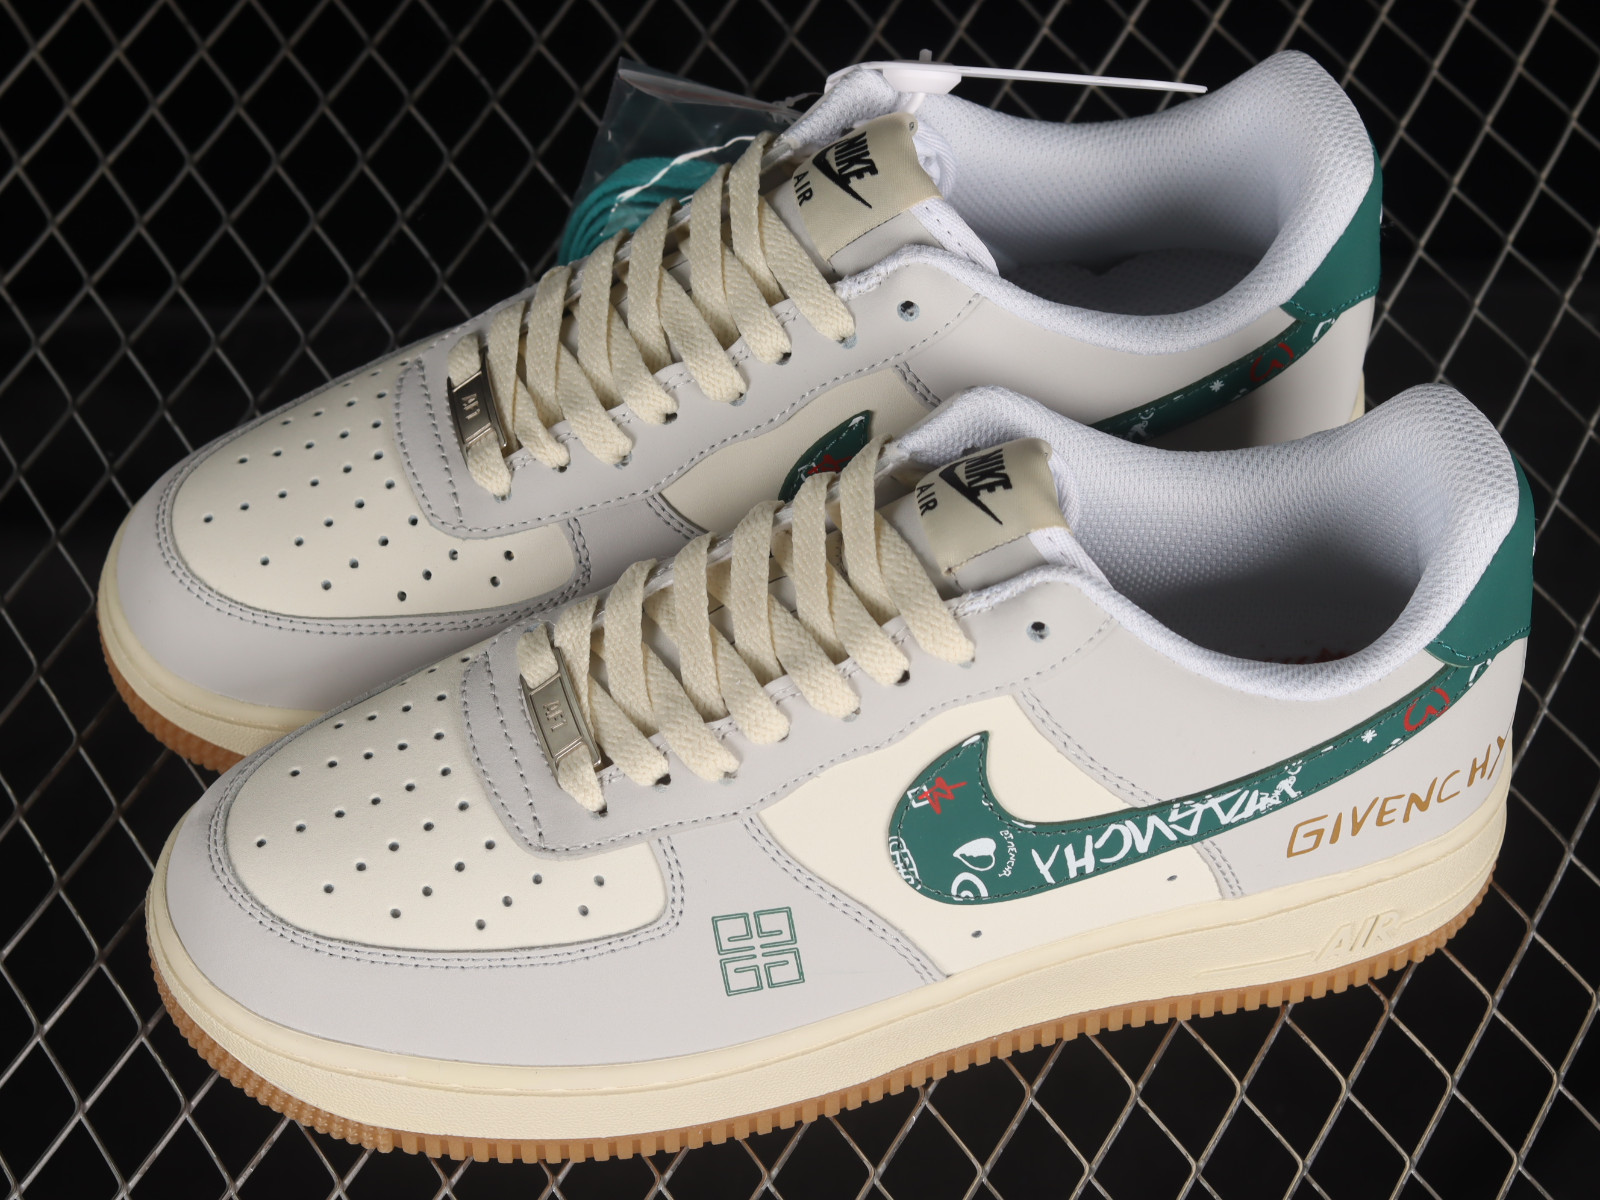 succes aangenaam Dageraad Nike Black Air Force 1 07 Low GIVENCHY White Grey Green BS9055 - 813 -  GmarShops - nike basketball player exclusive pack now available